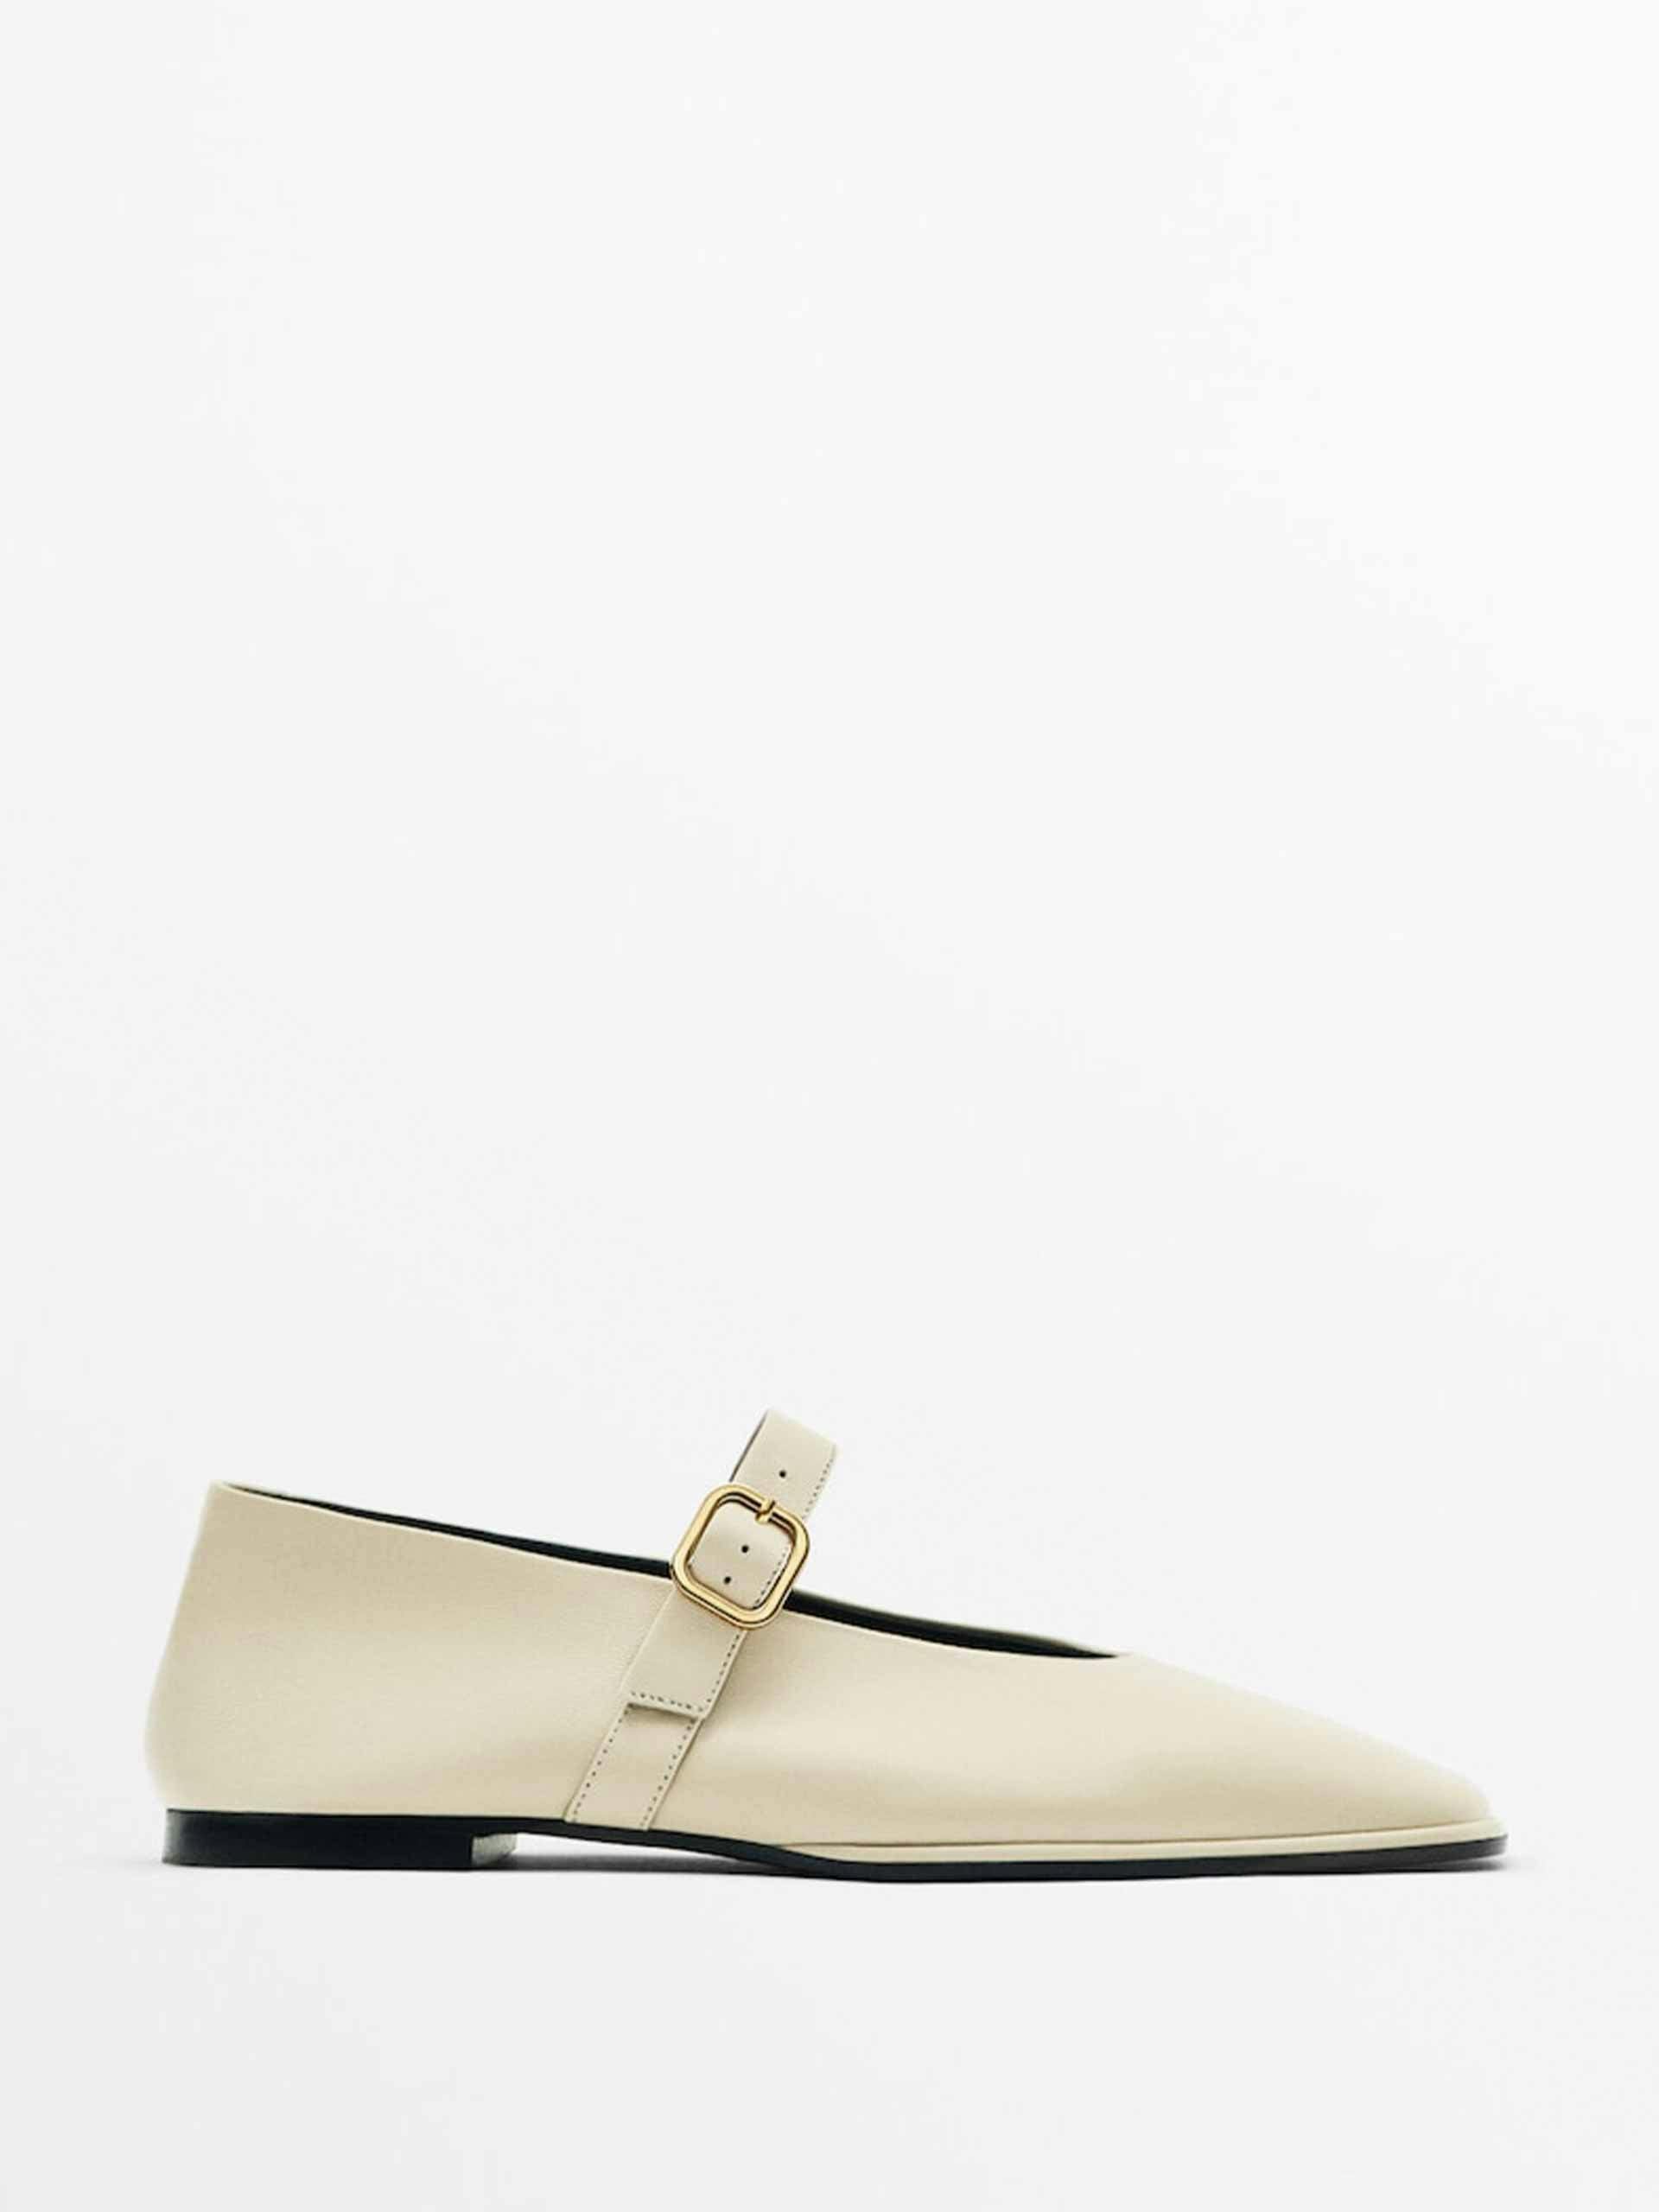 Square ballet flats with buckle